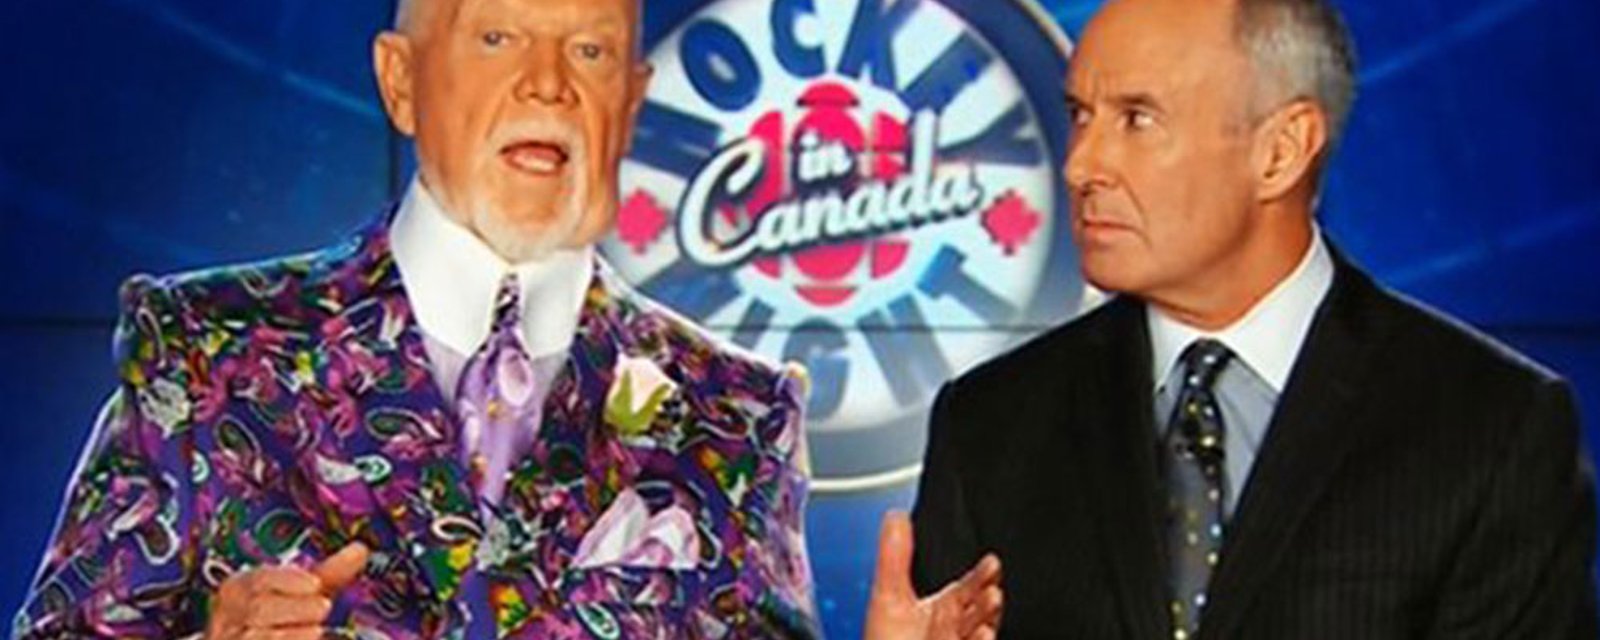 Rumblings that Don Cherry may be among layoffs at Sportsnet